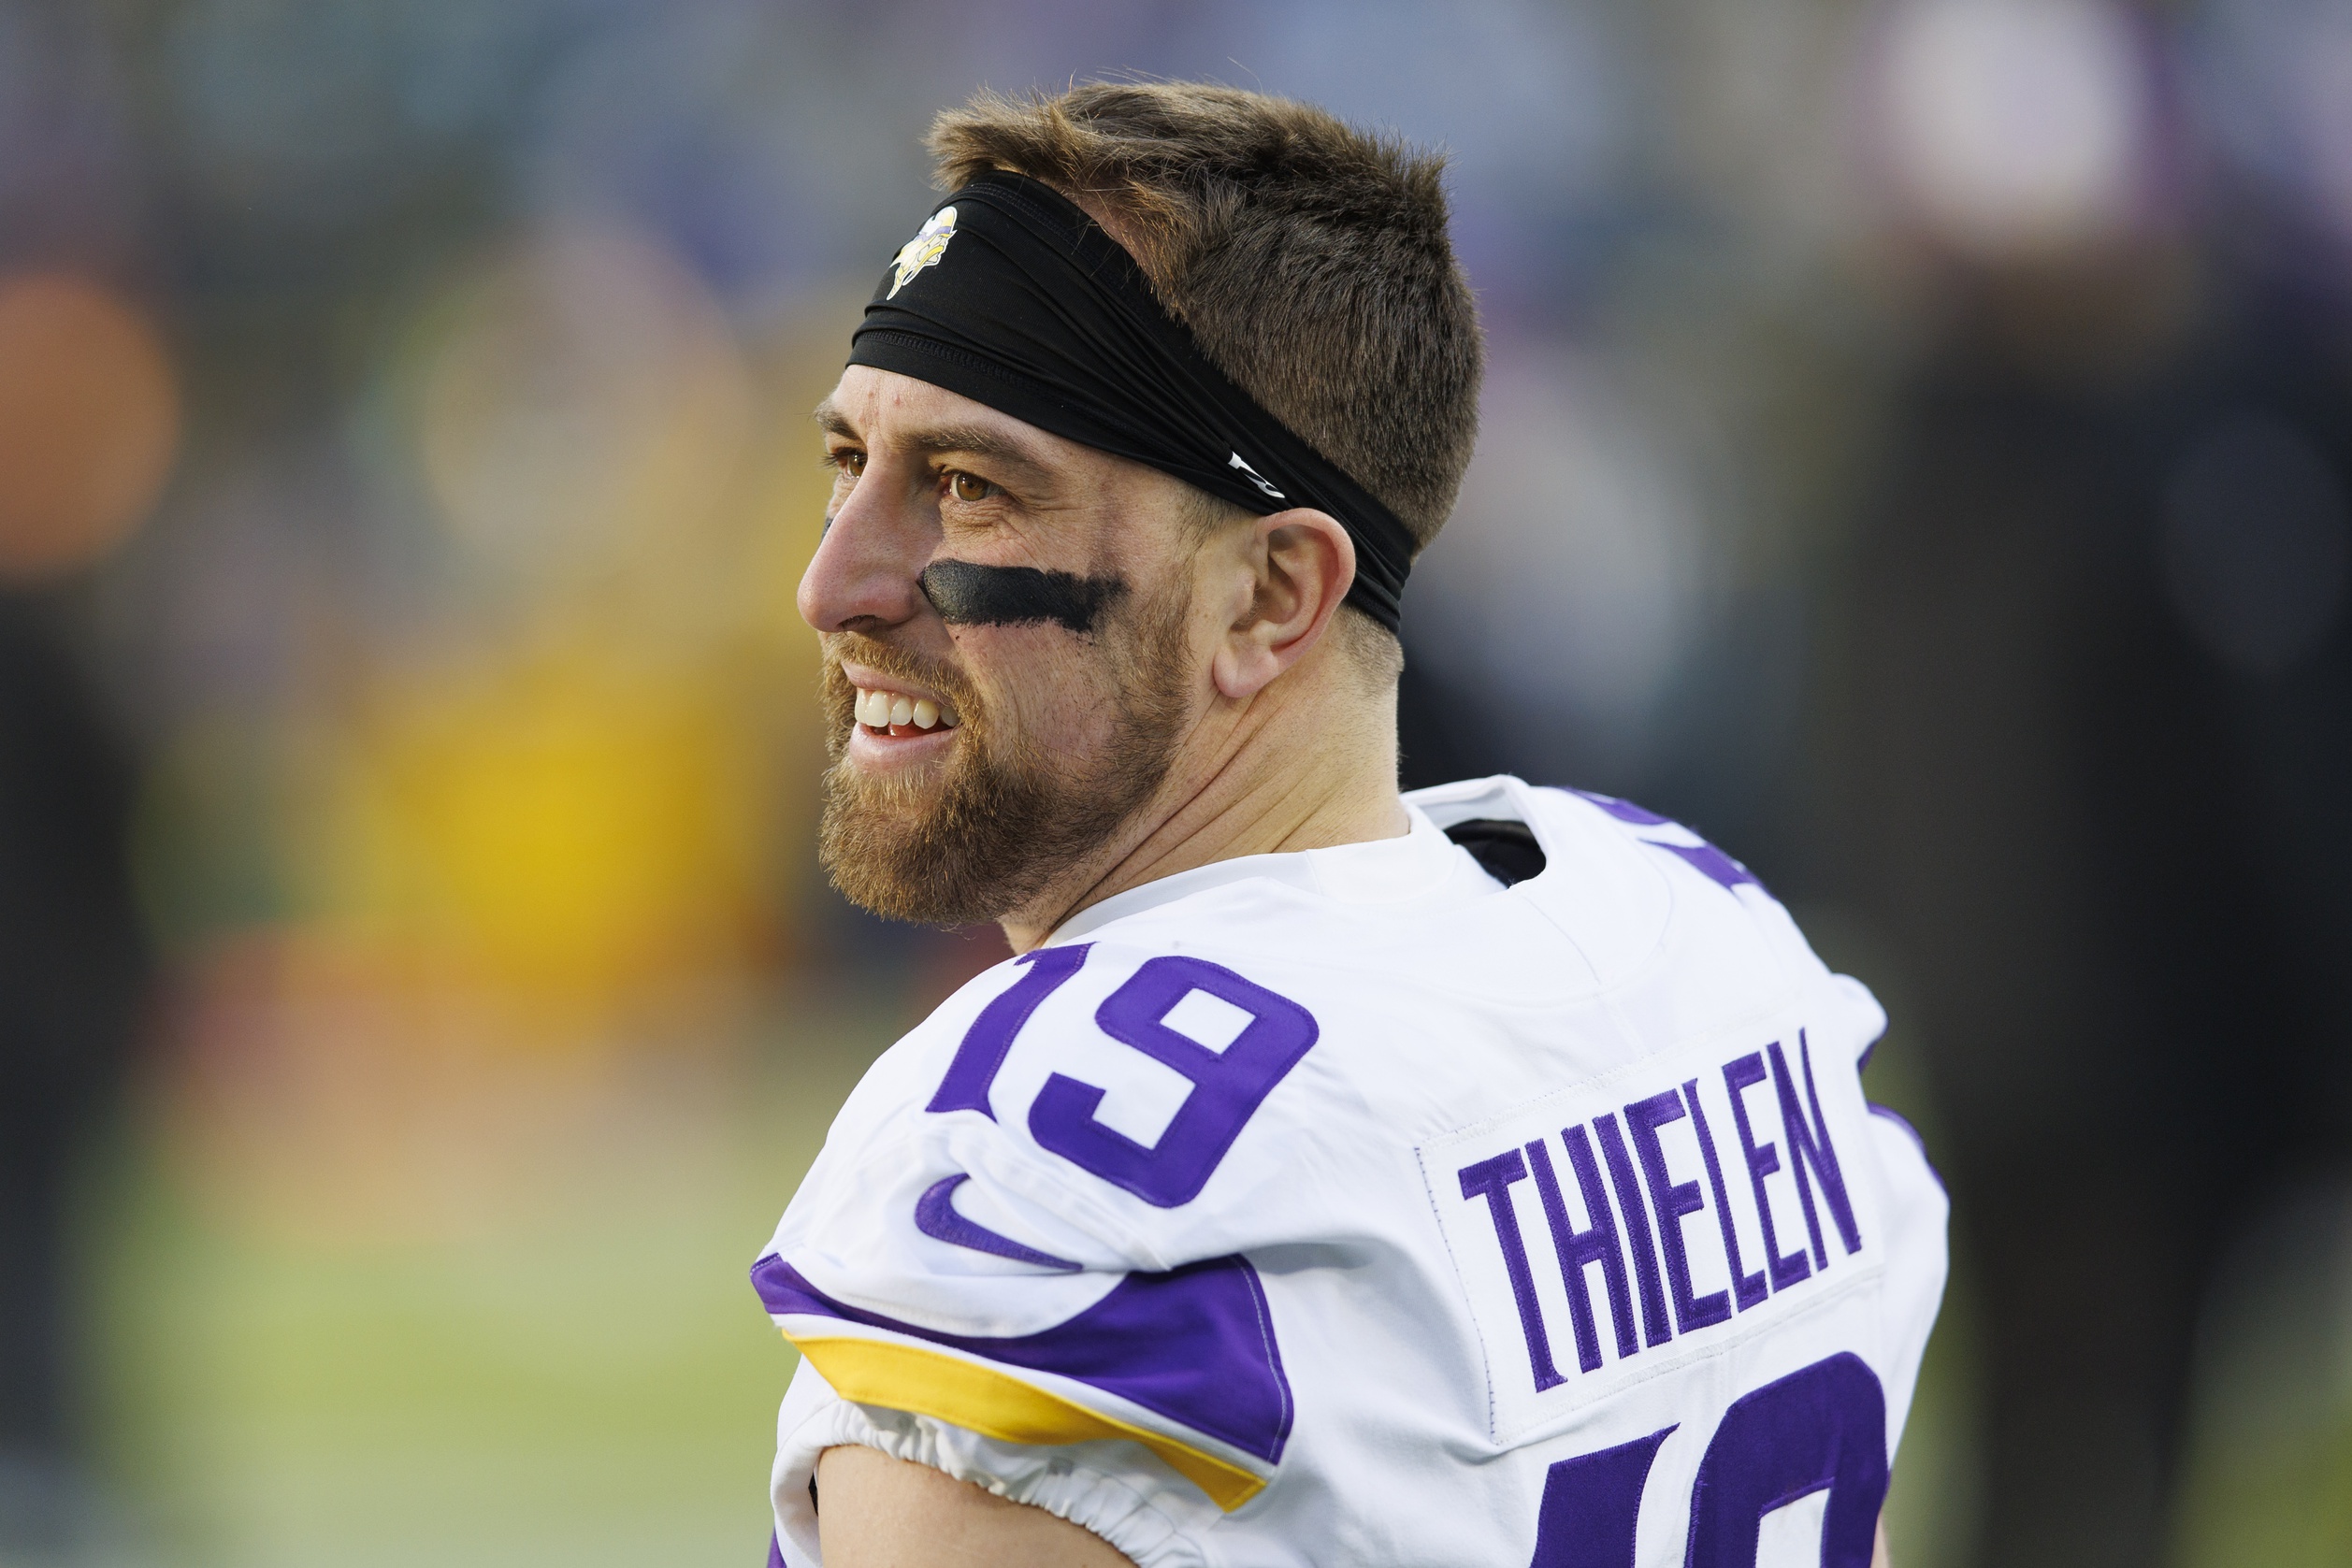 Adam Thielen on uncertain future with Vikings: 'I do know that I have a lot of ball left' thumbnail